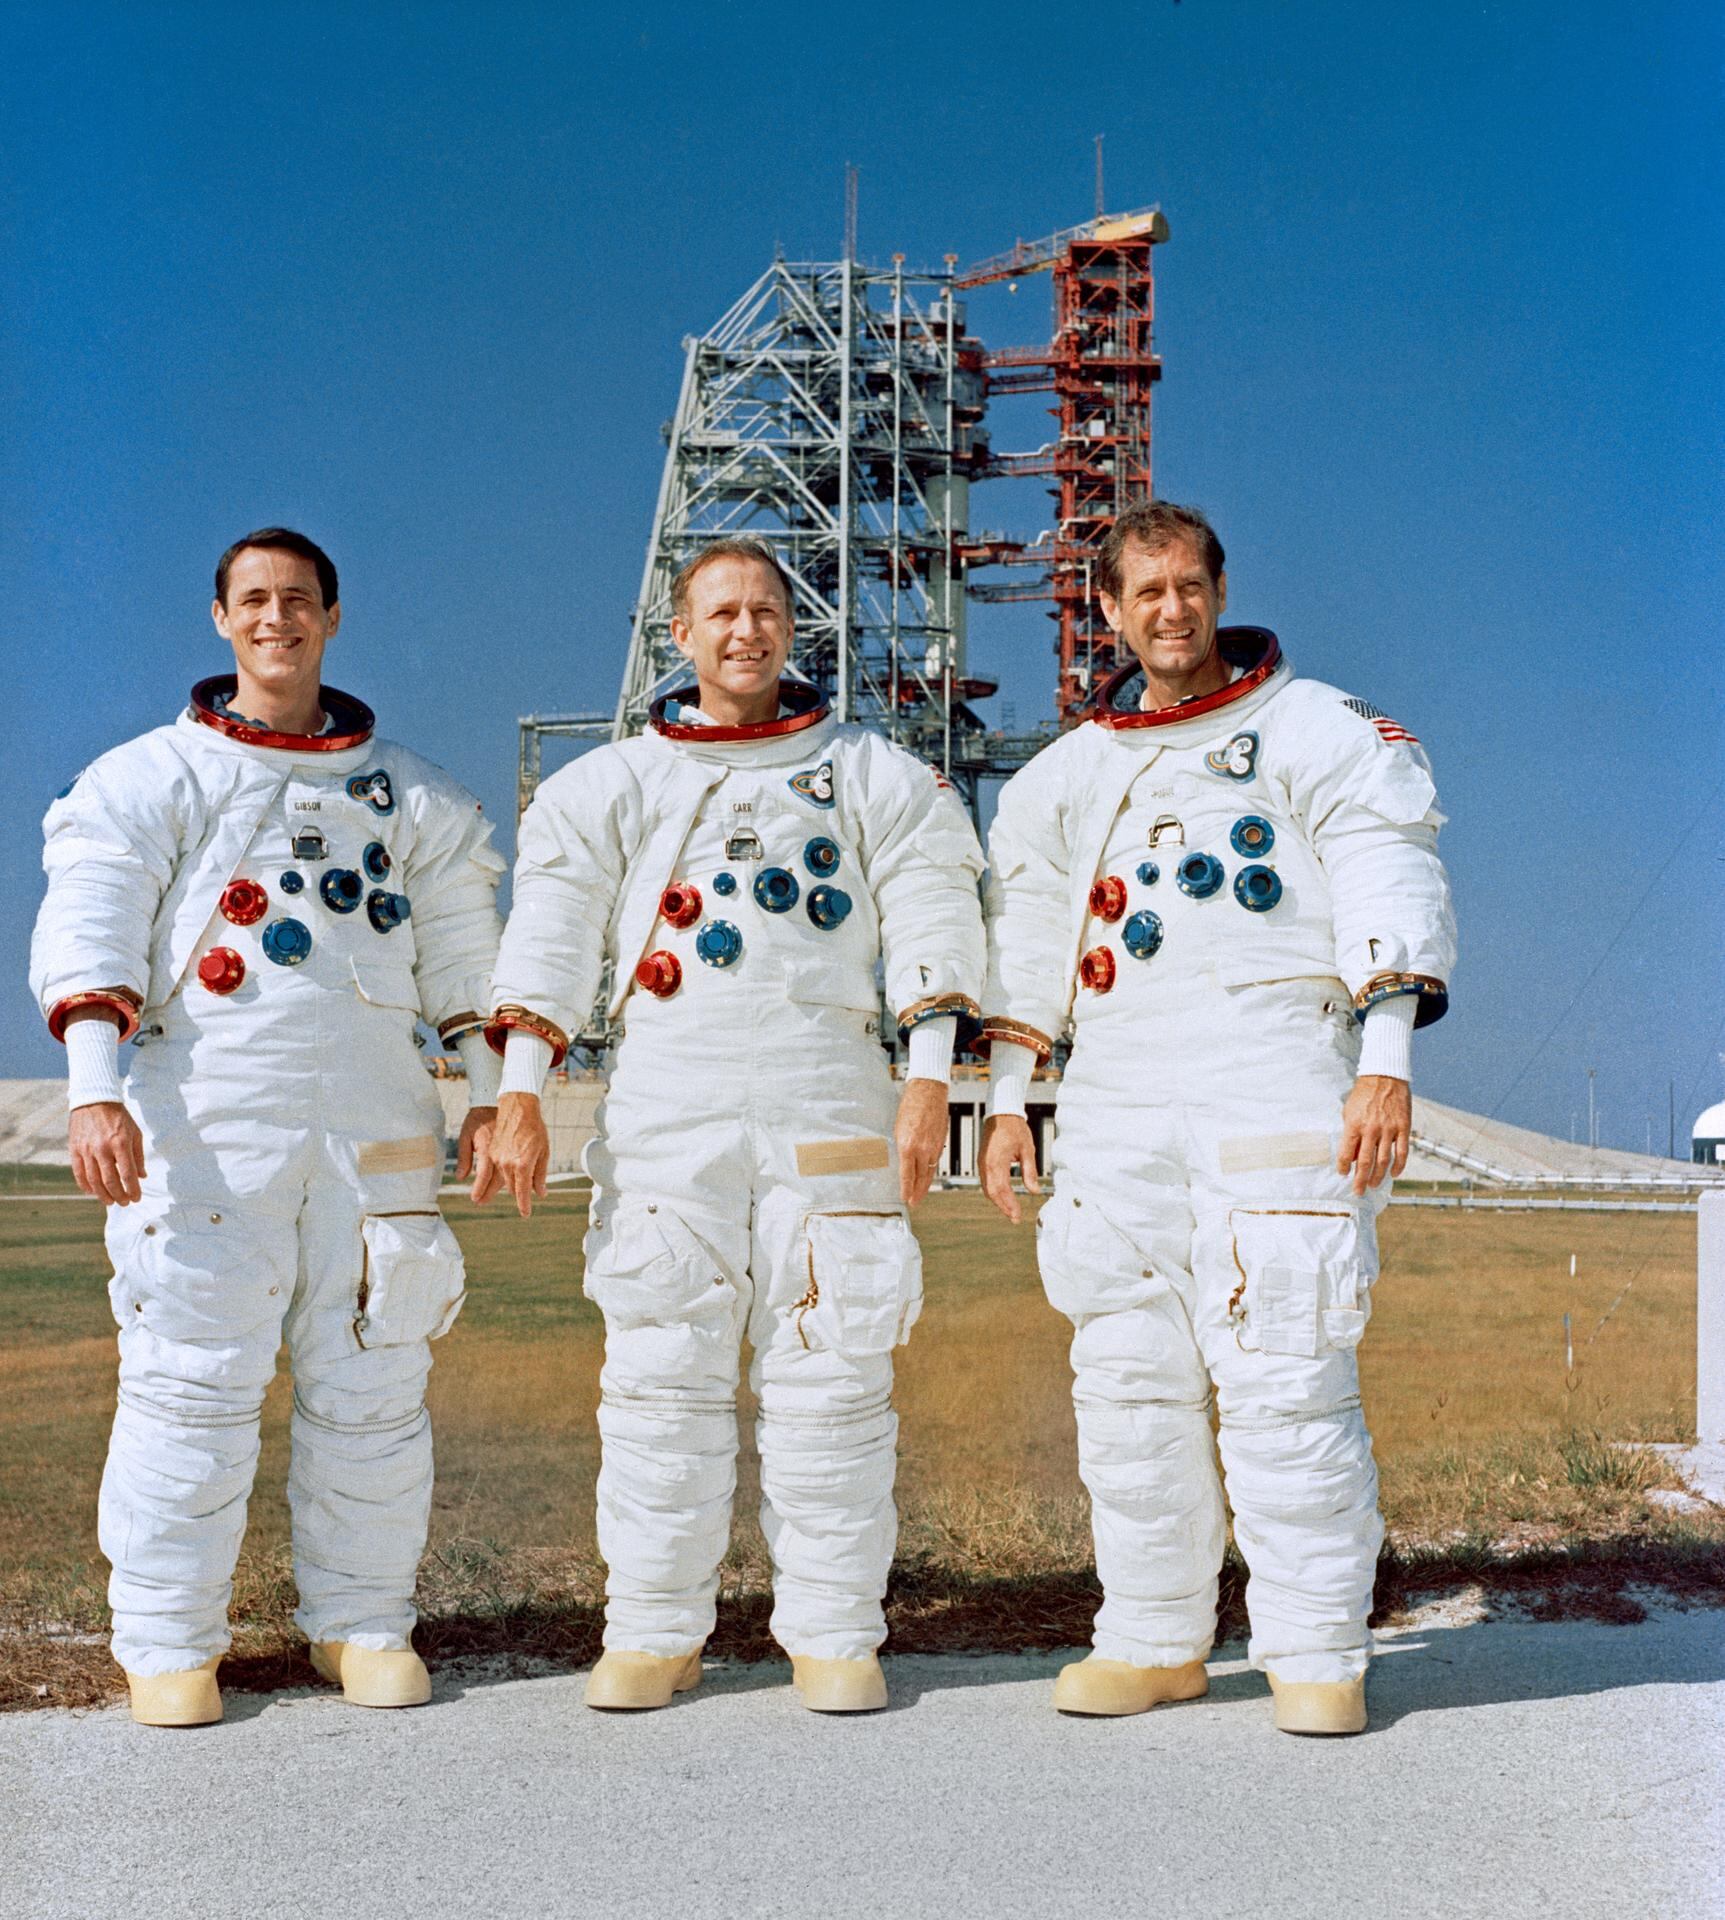 Skylab 4 crew members from left: Edward G. Gibson, Gerald P. Carr and William R. Pogue; Kennedy Space Center, Florida; November 8, 1973.